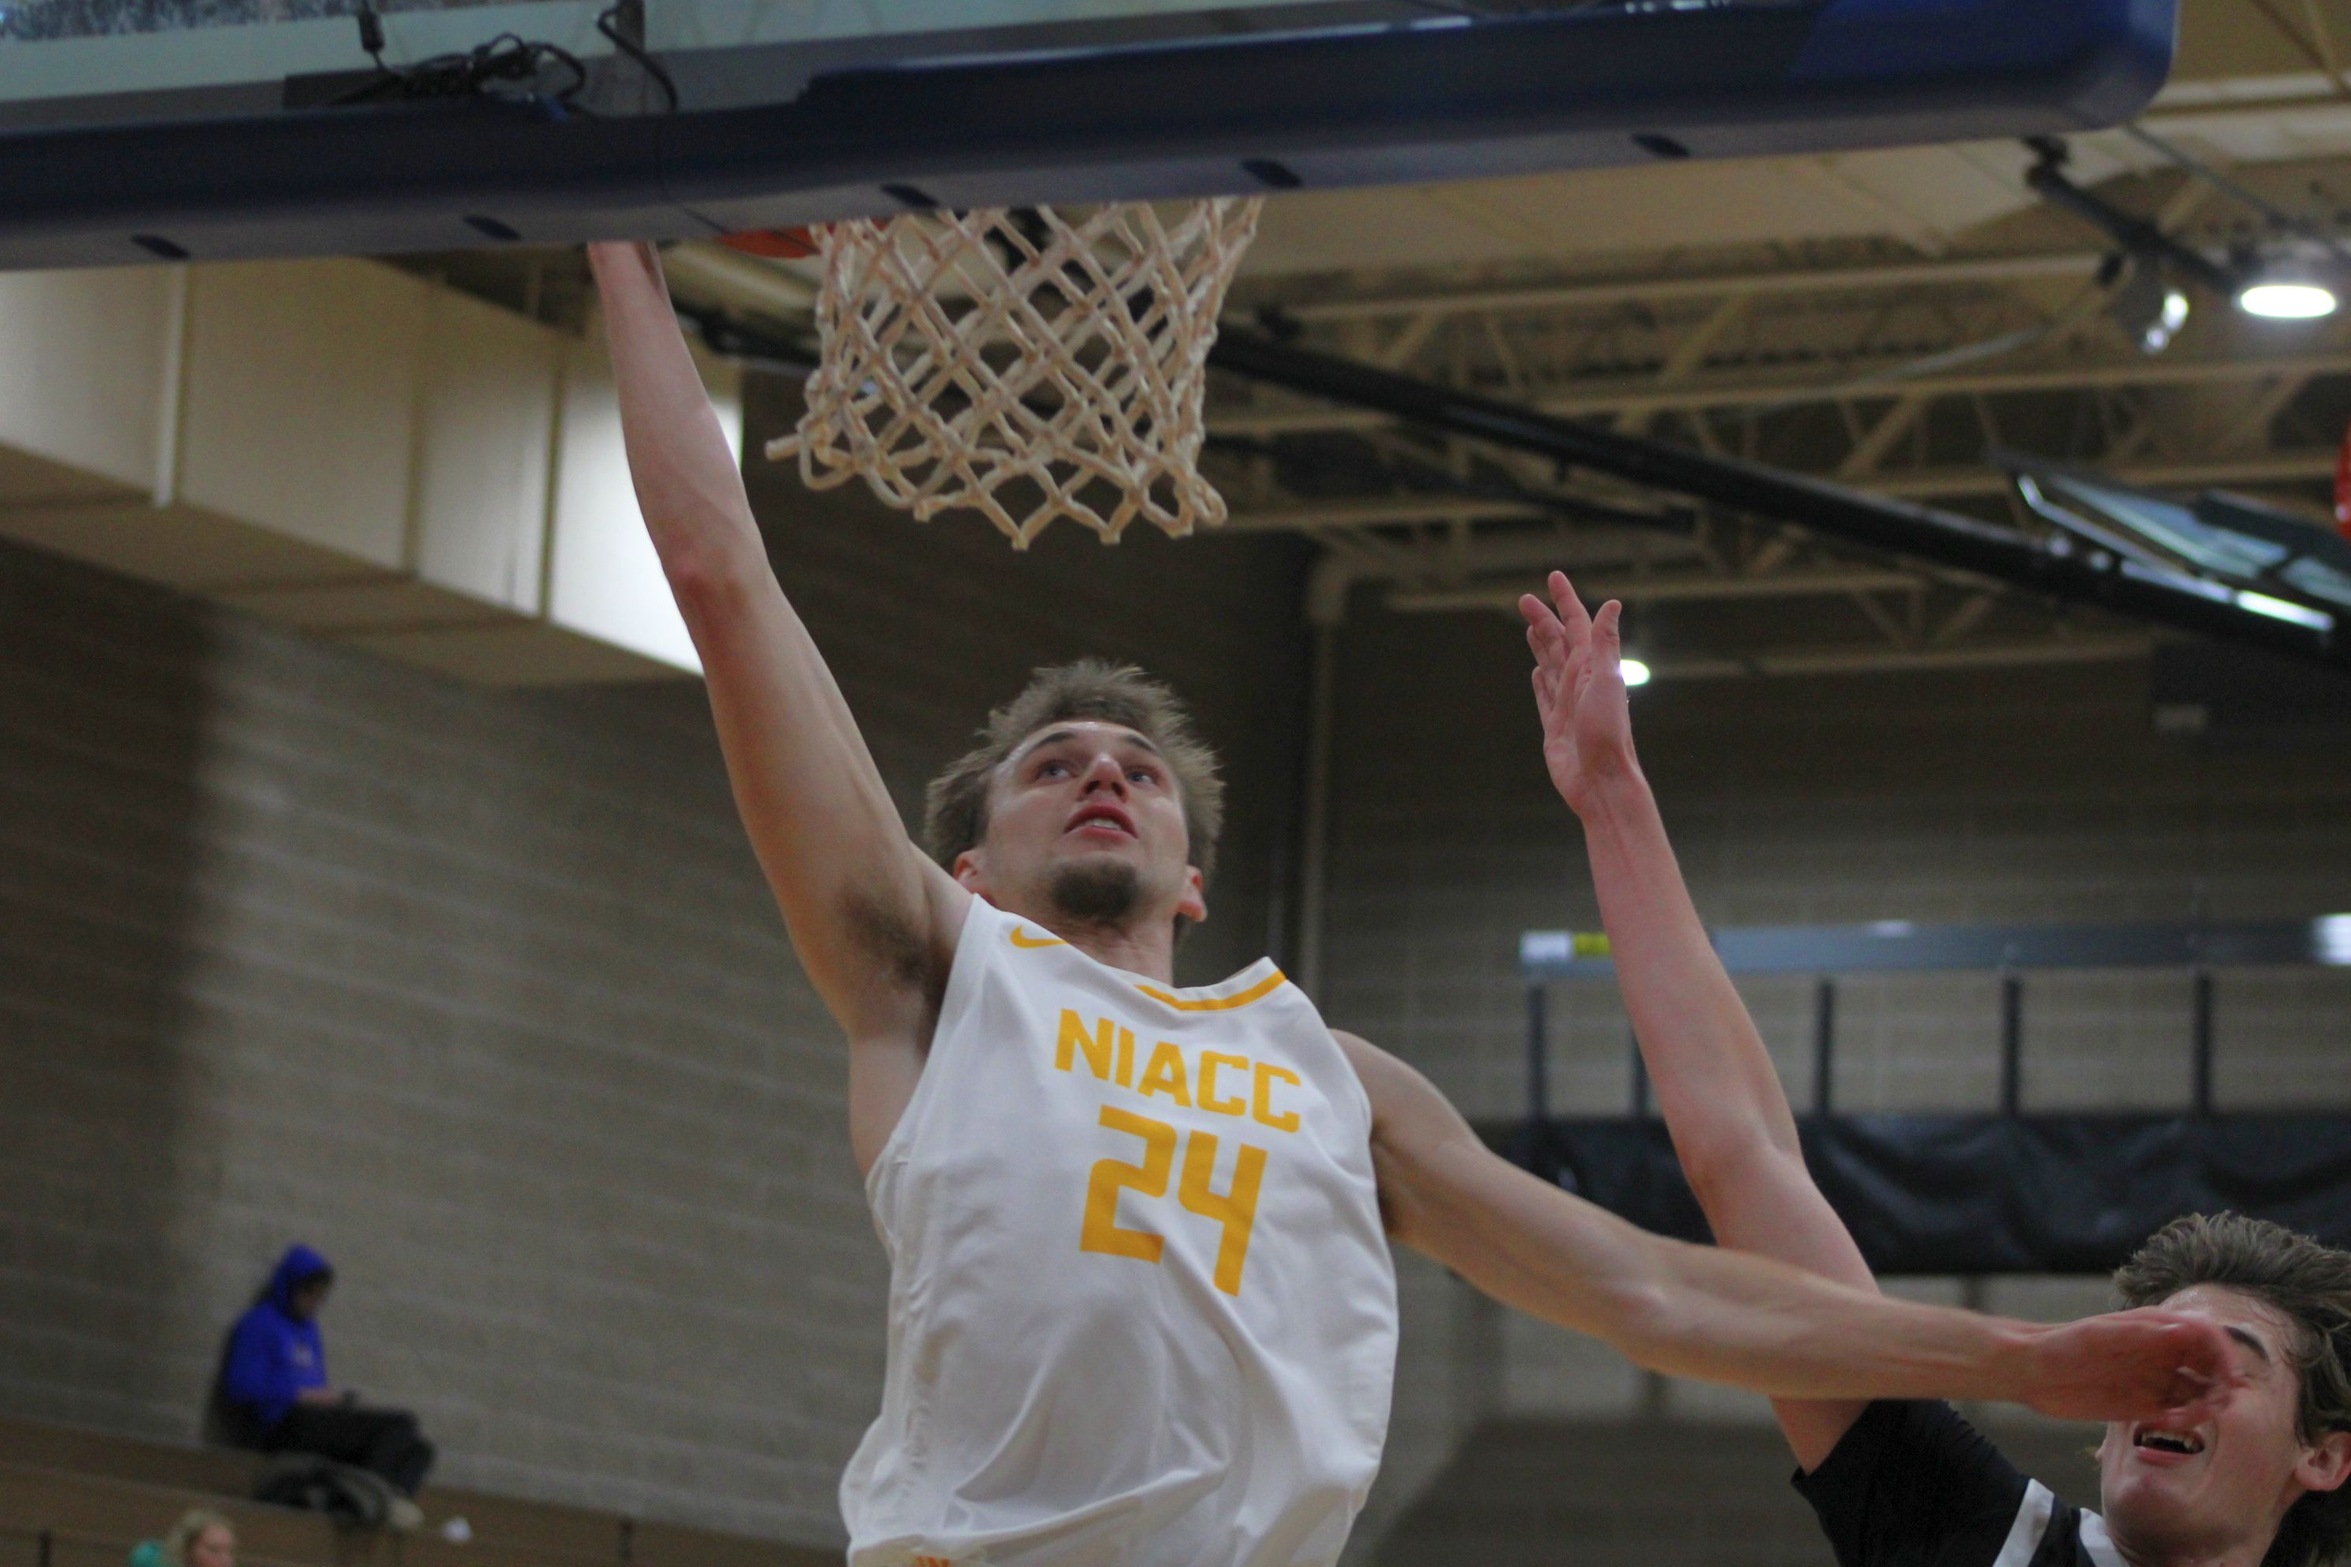 NIACC's Chett Helming dunks in Saturday's game against Northeast CC.